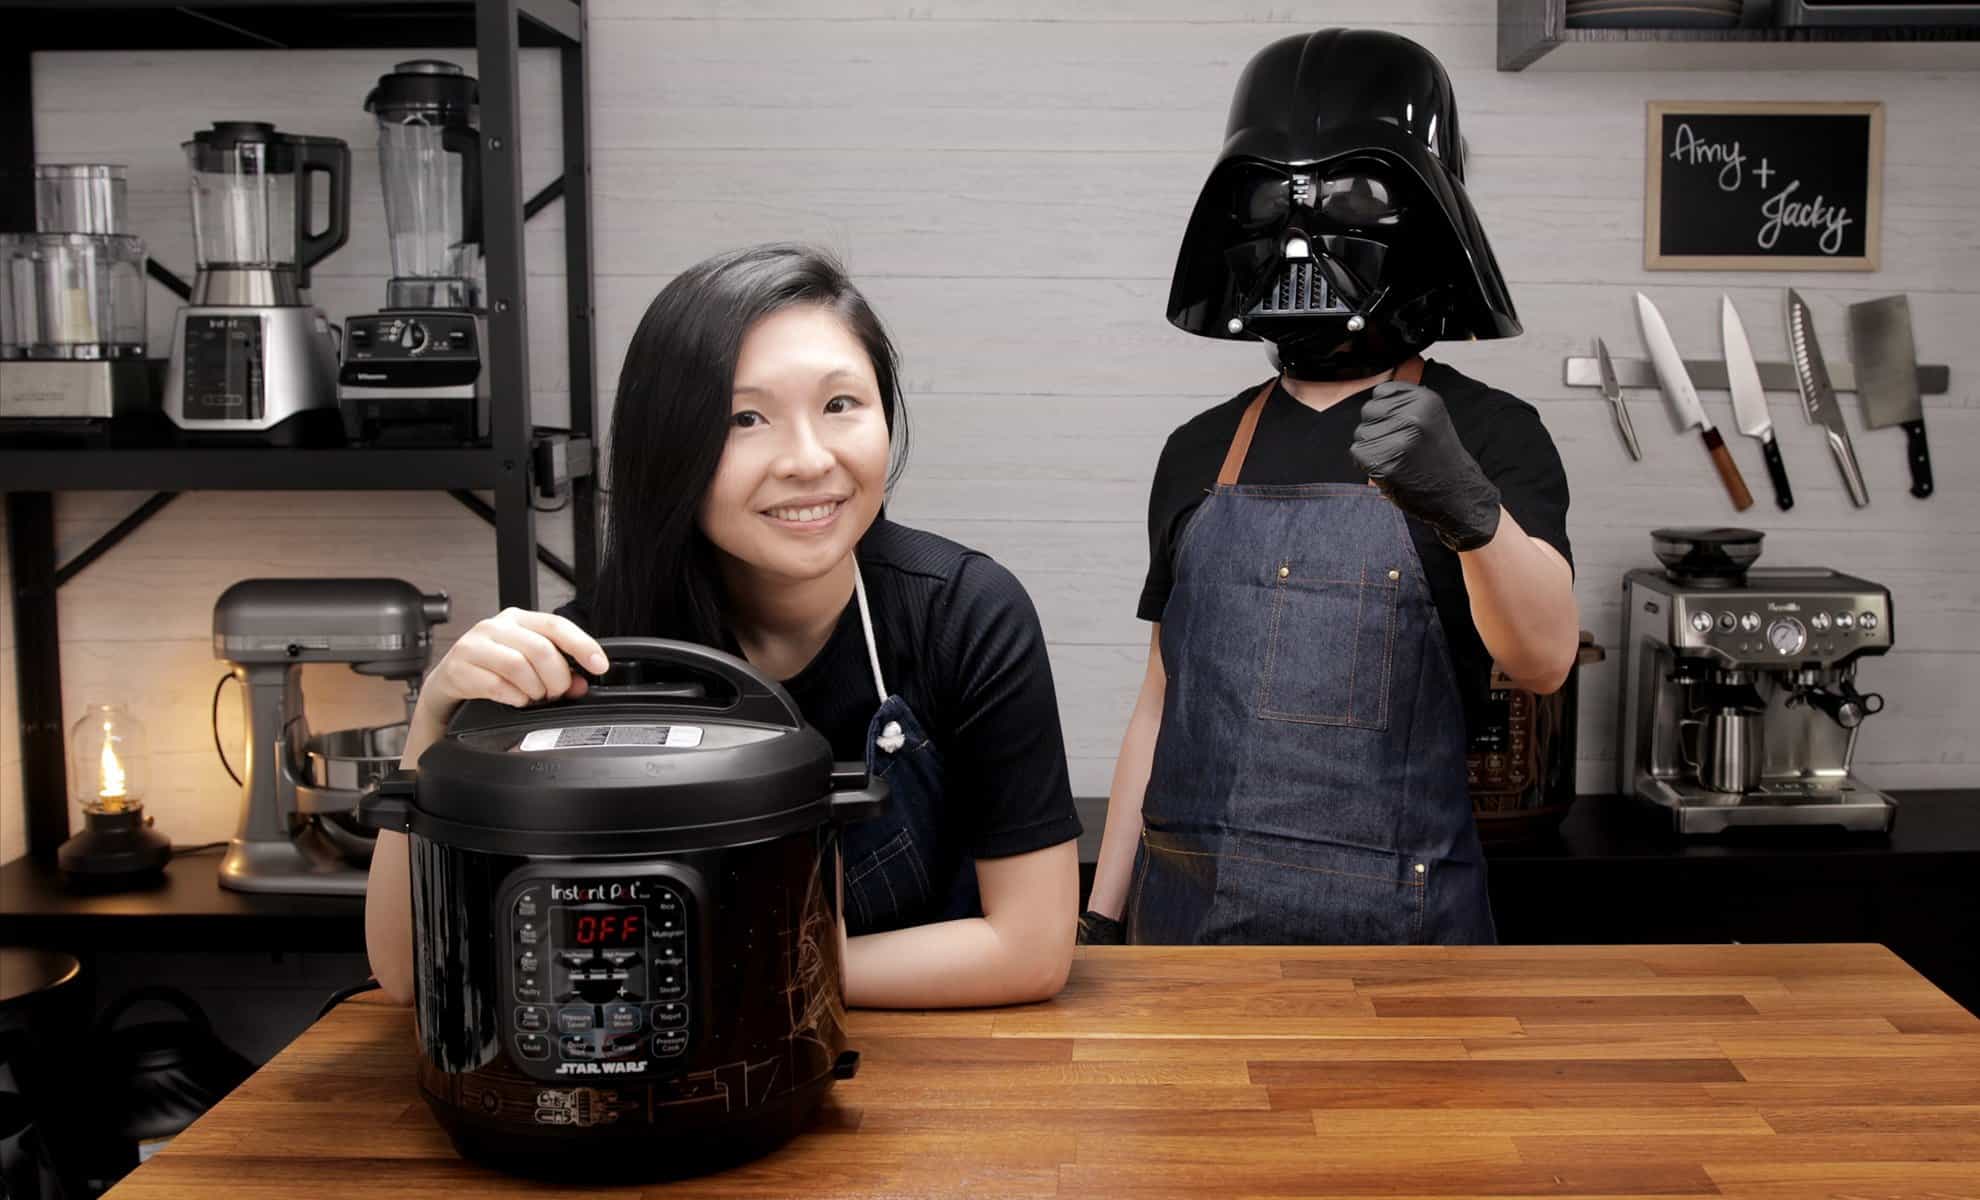 Instant Pot just released a Star Wars collection